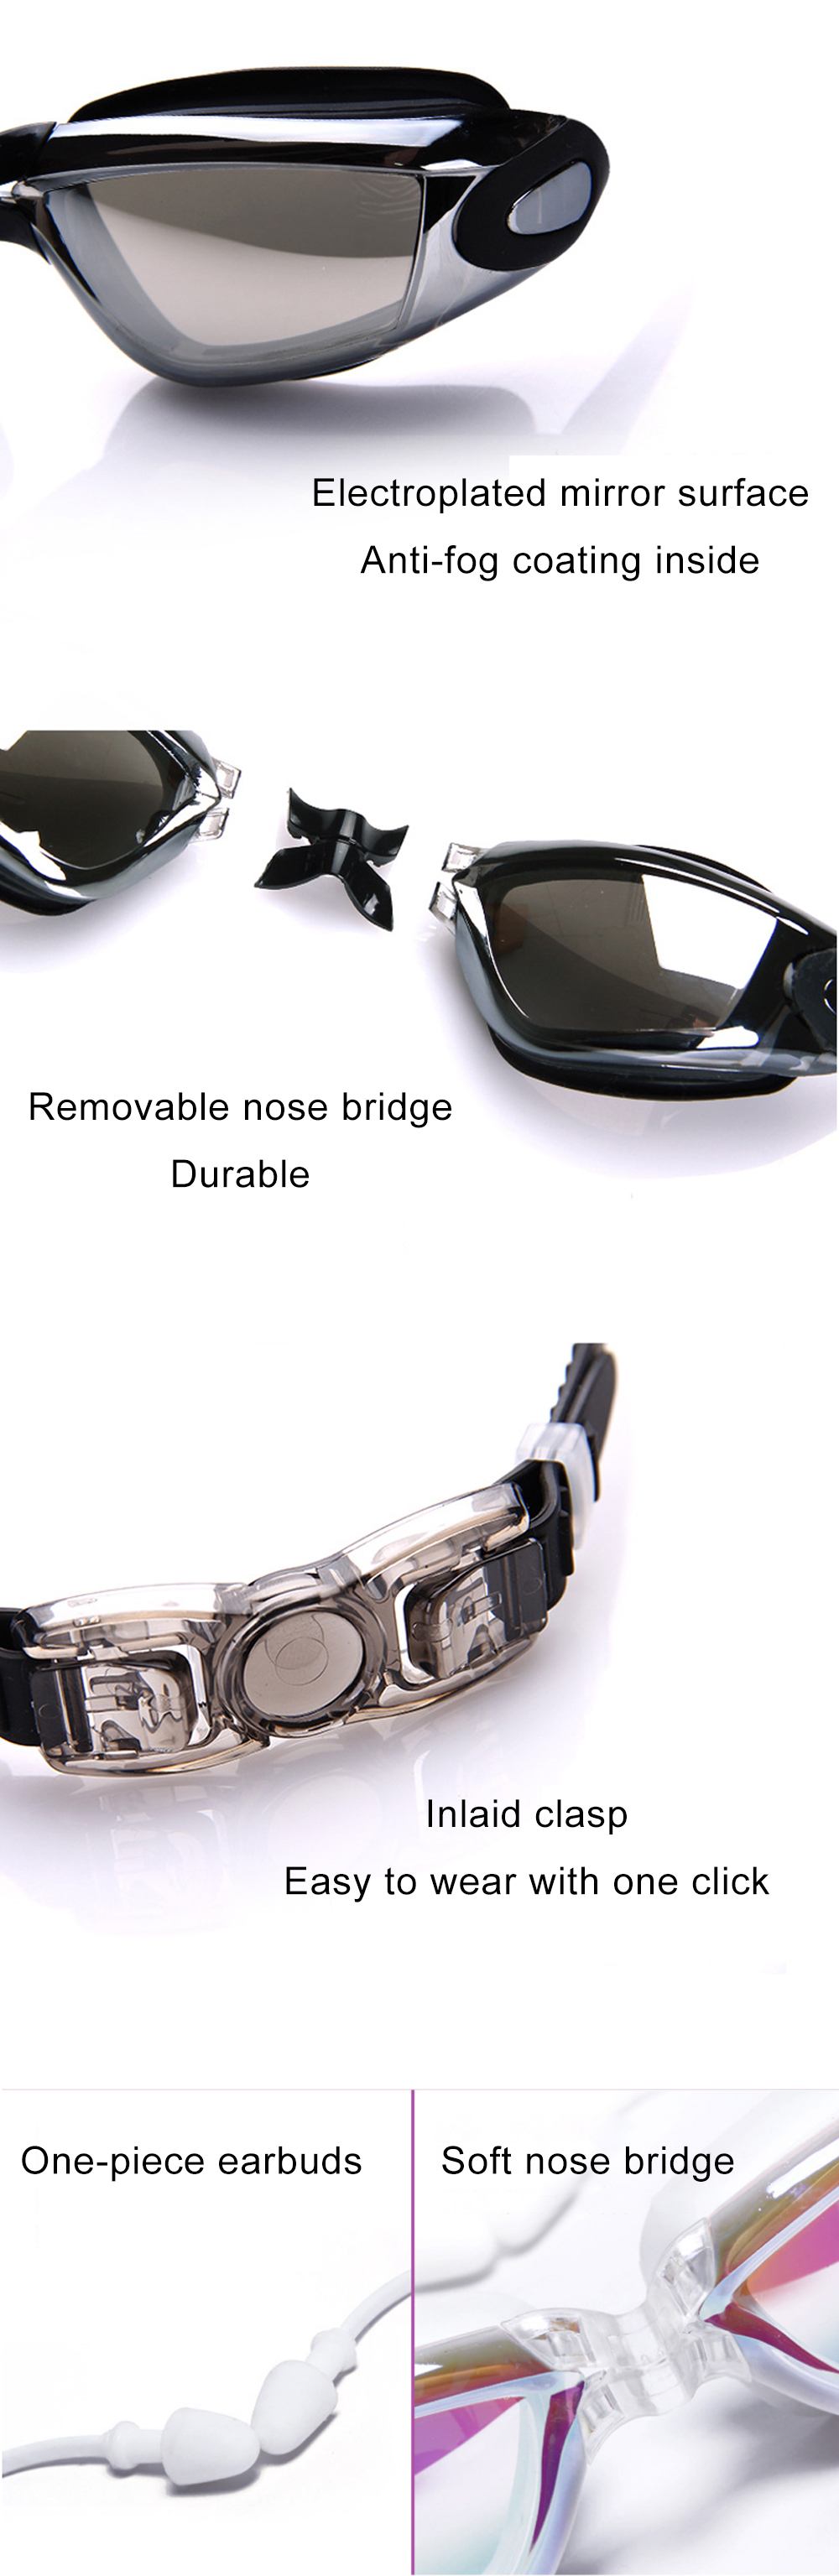 Swimming-Goggles-One-piece-Earplug-No-Leaking-Anti-Fog-Clear-Vision-Large-Frame-Eye-Protection-Wide--1881118-2